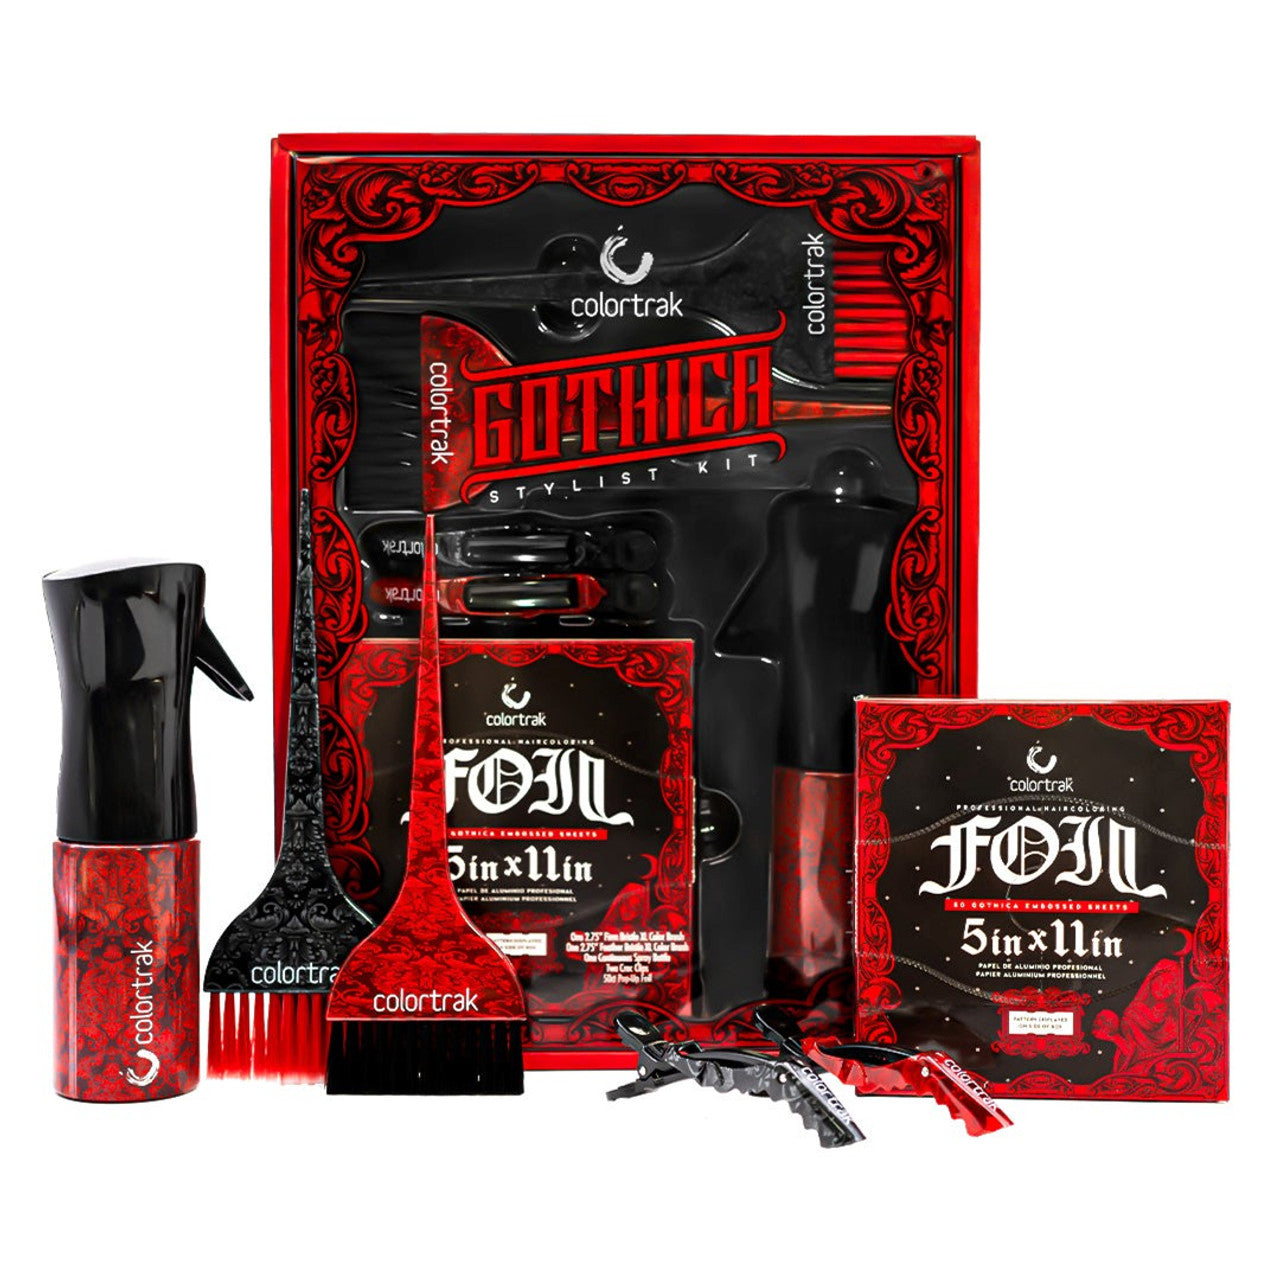 Gothica Collection Stylist Kit